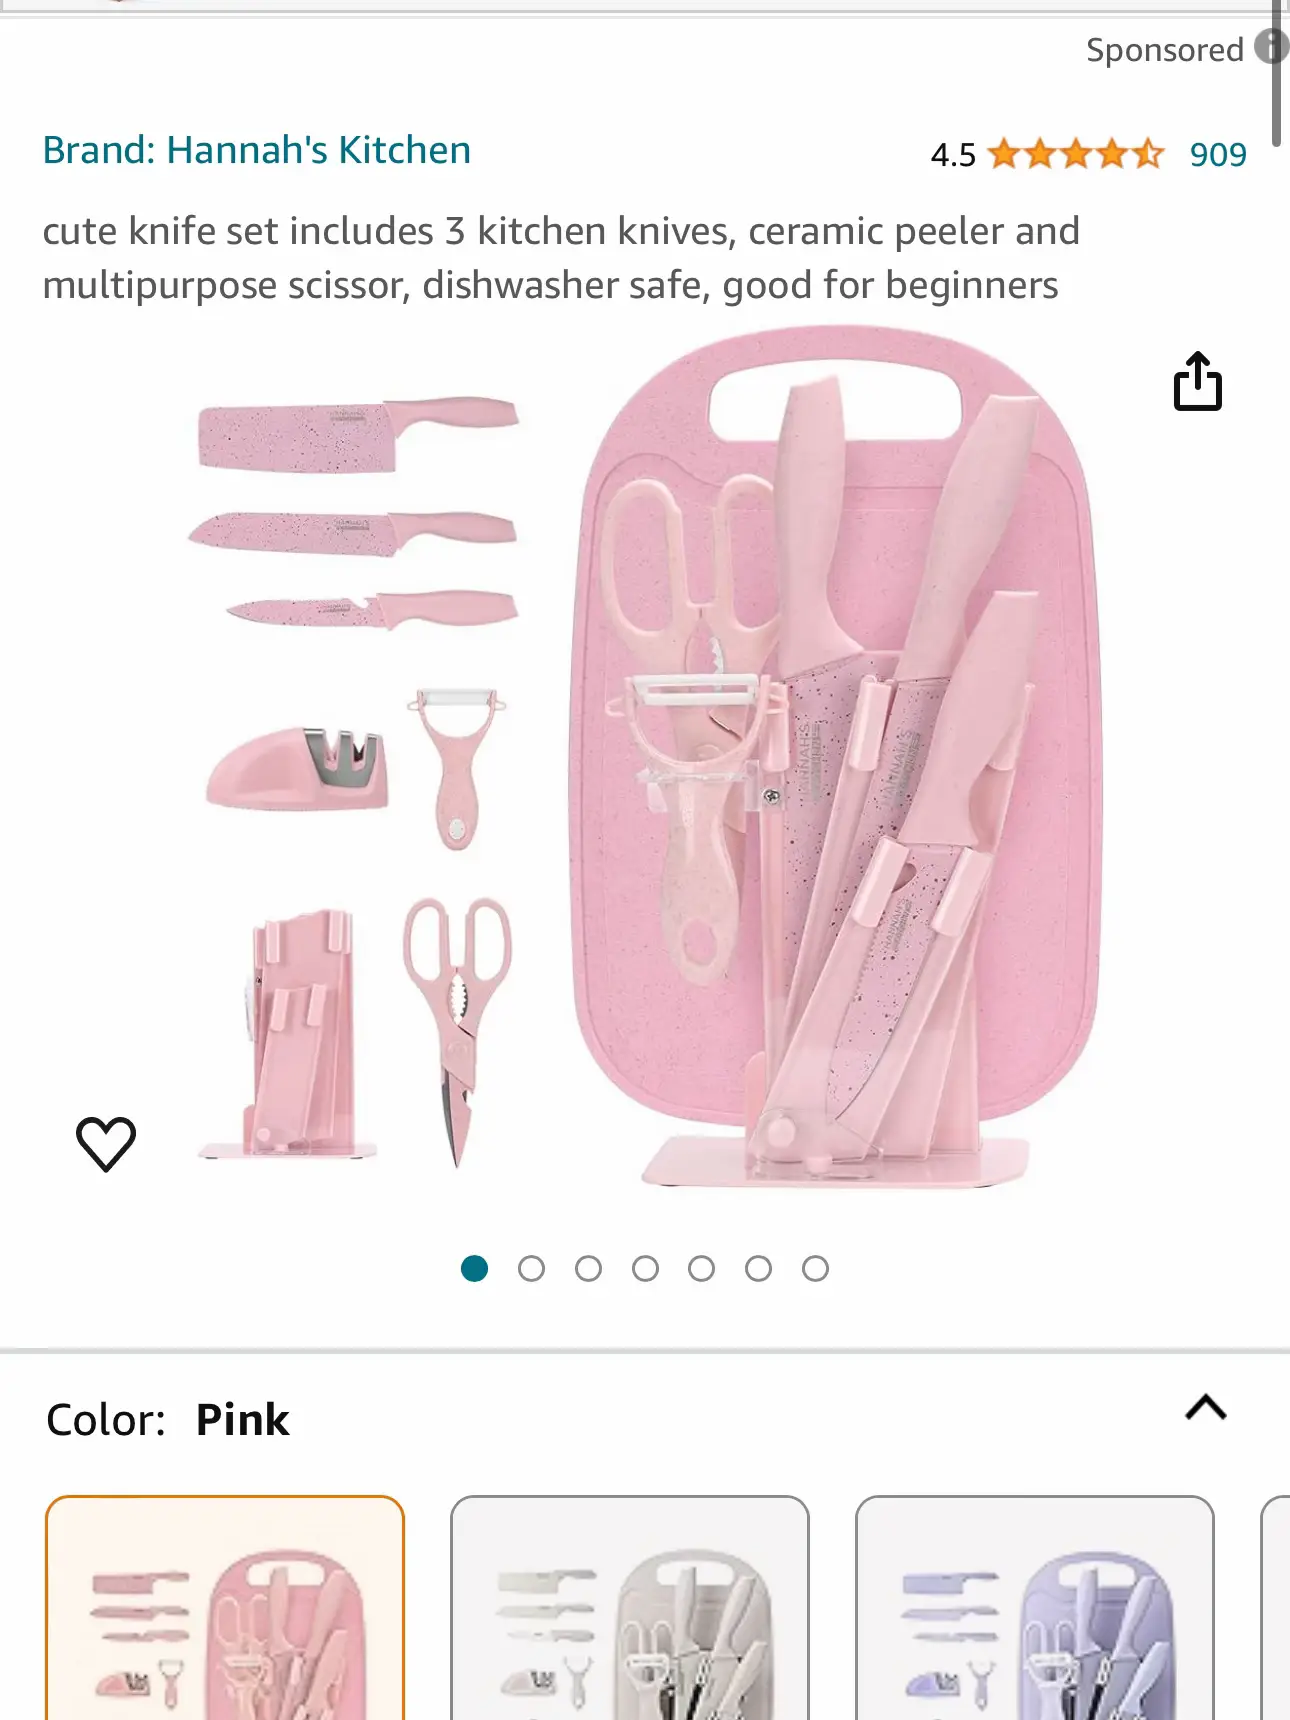 Hannah's Kitchen - cute knife set includes 3 kitchen knives, ceramic peeler  and multipurpose scissor, dishwasher safe, good for beginners (Yellow)